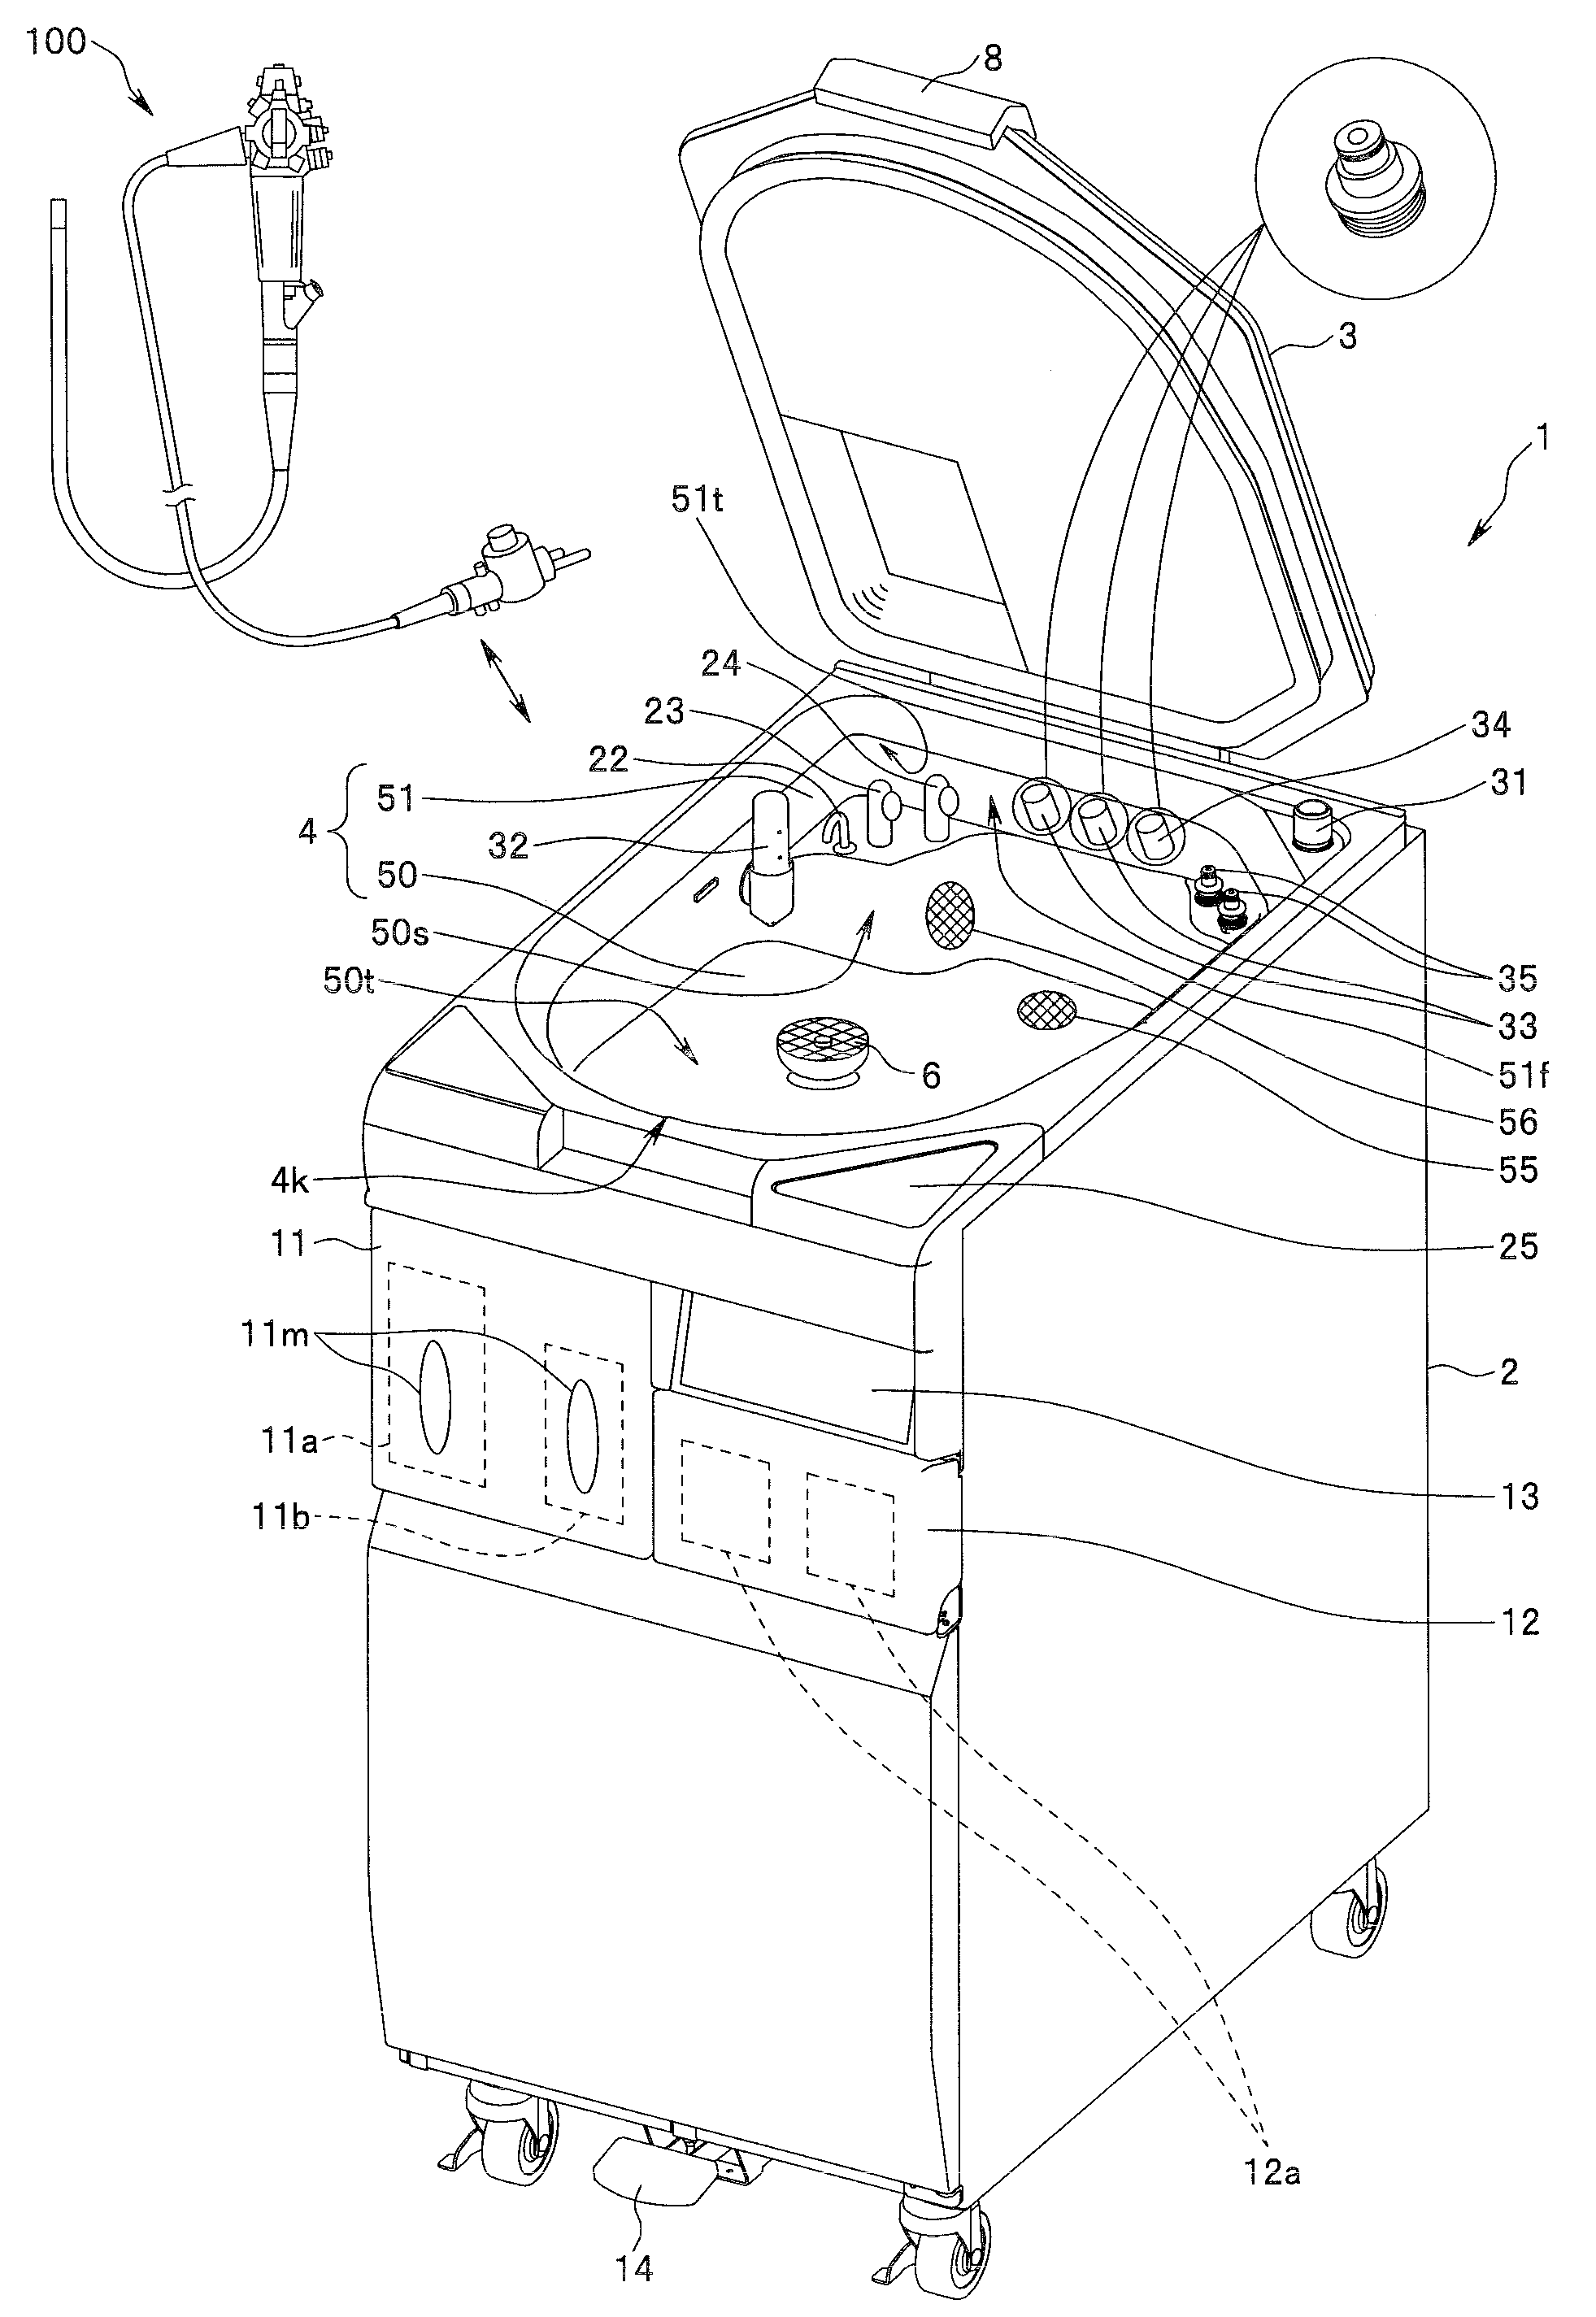 Endoscope washing and disinfecting apparatus and method of washing endoscope using endoscope washing and disinfecting apparatus